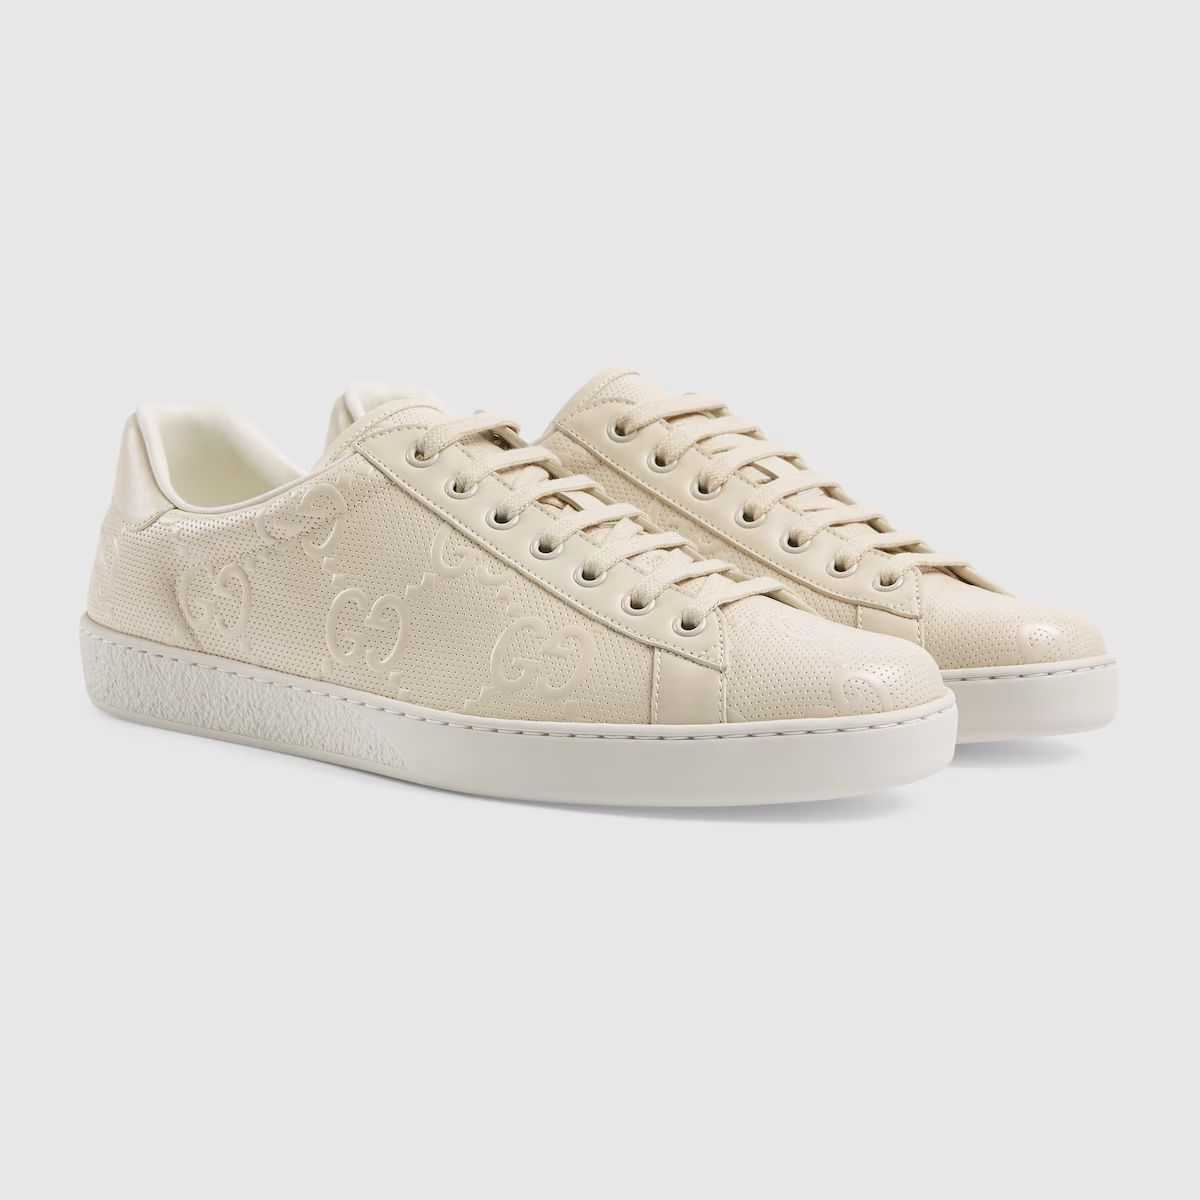 Gucci Men's Ace GG embossed sneaker | Gucci (US)